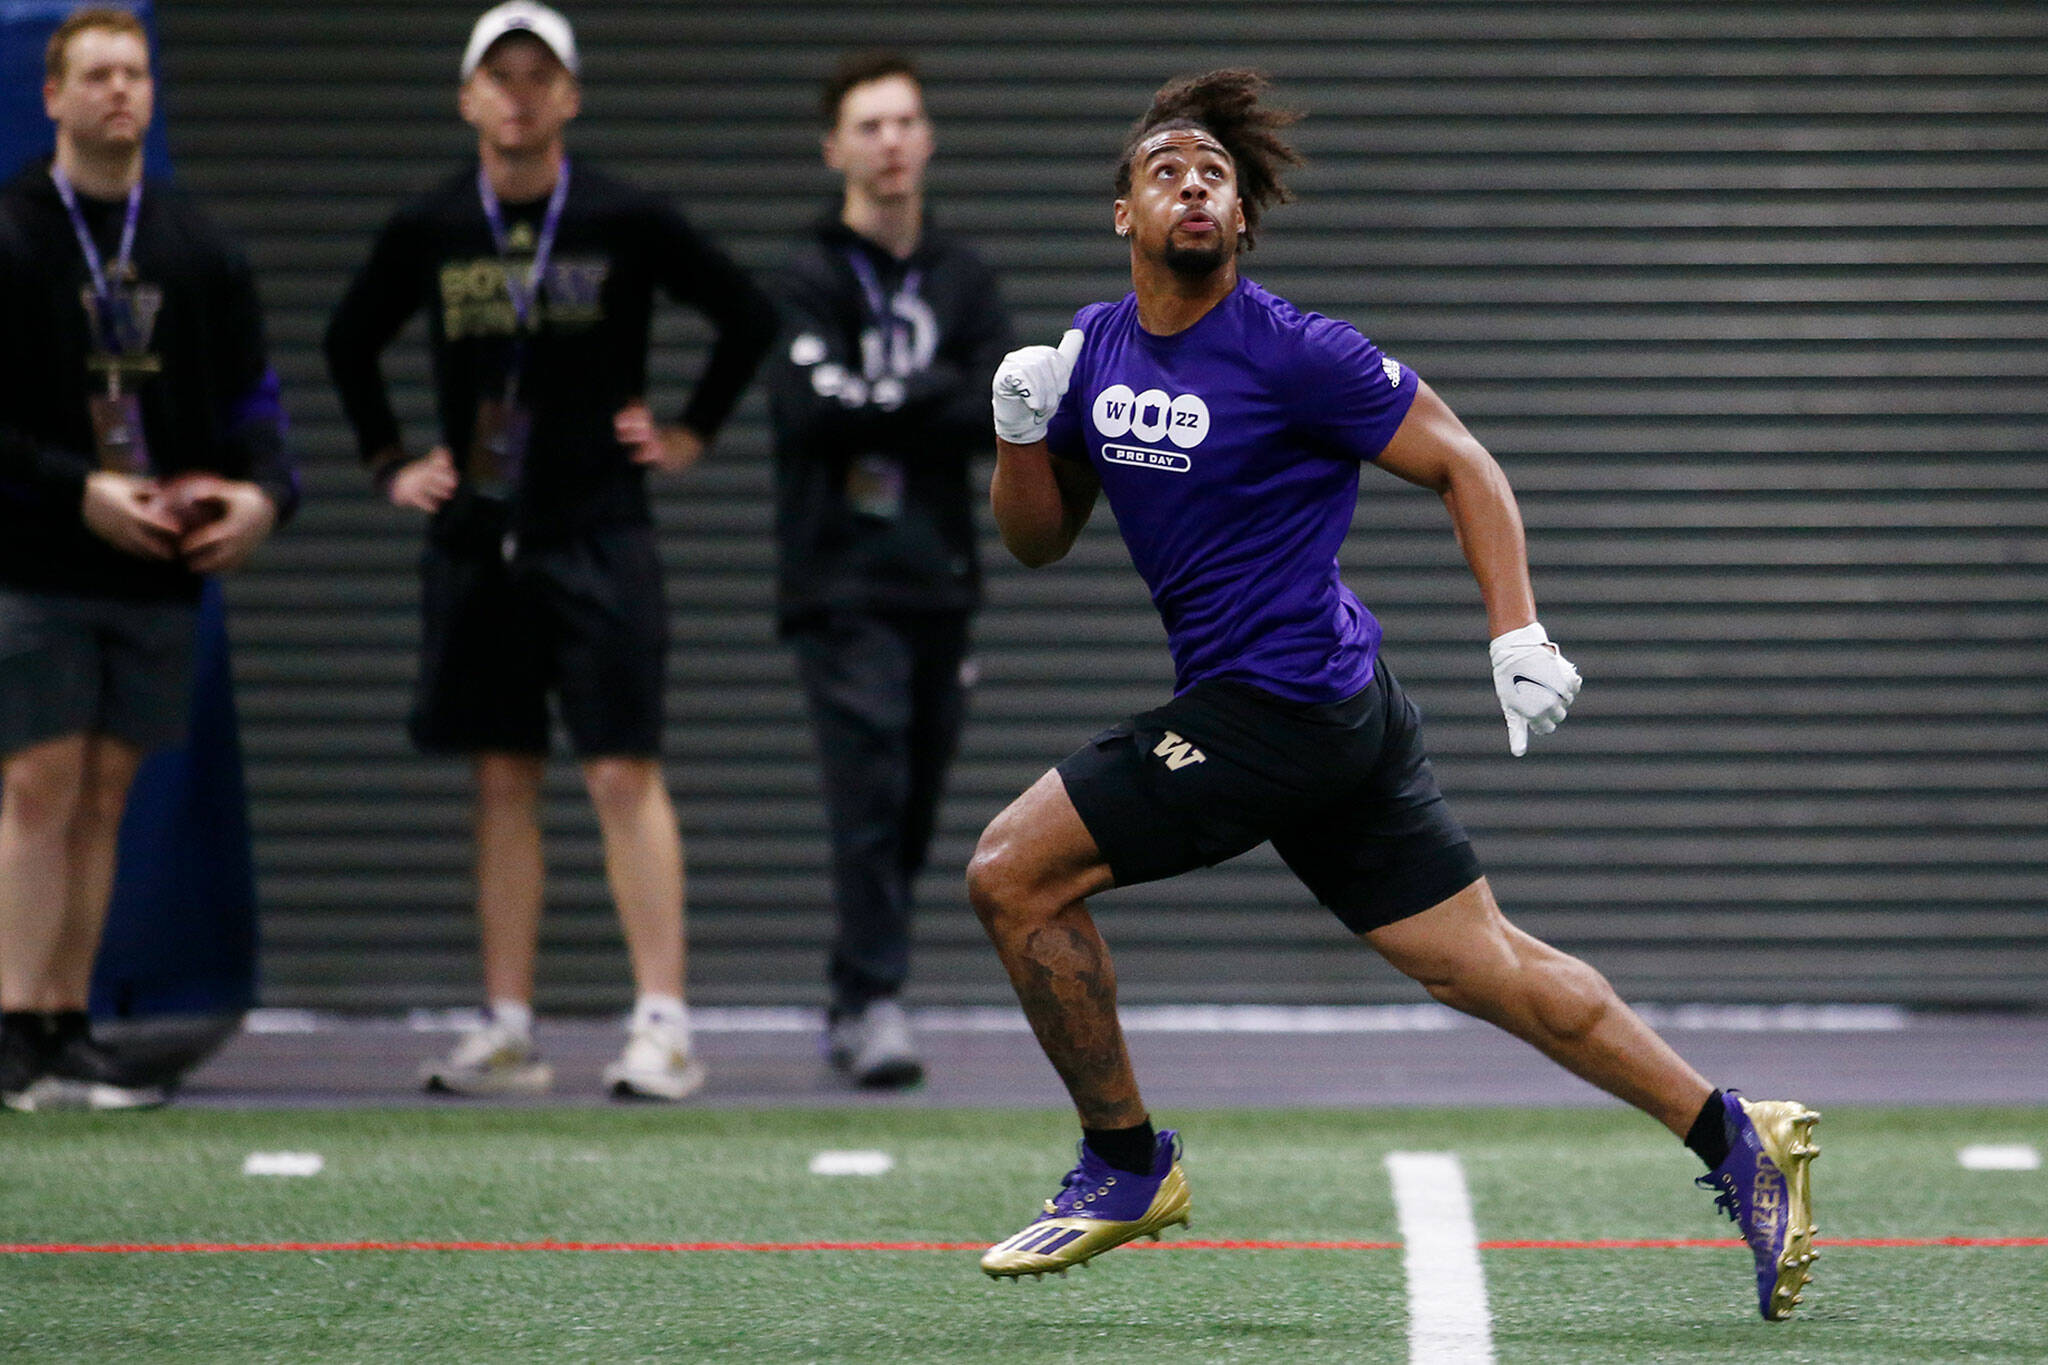 Kyler Gordon, an Archbishop Murphy High School graduate and University of Washington cornerback, tracks the ball in the air during positional drills at UW’s Pro Day Tuesday, March 29, 2022, at the Dempsey Indoor Center in Seattle, Washington. (Ryan Berry / The Herald)